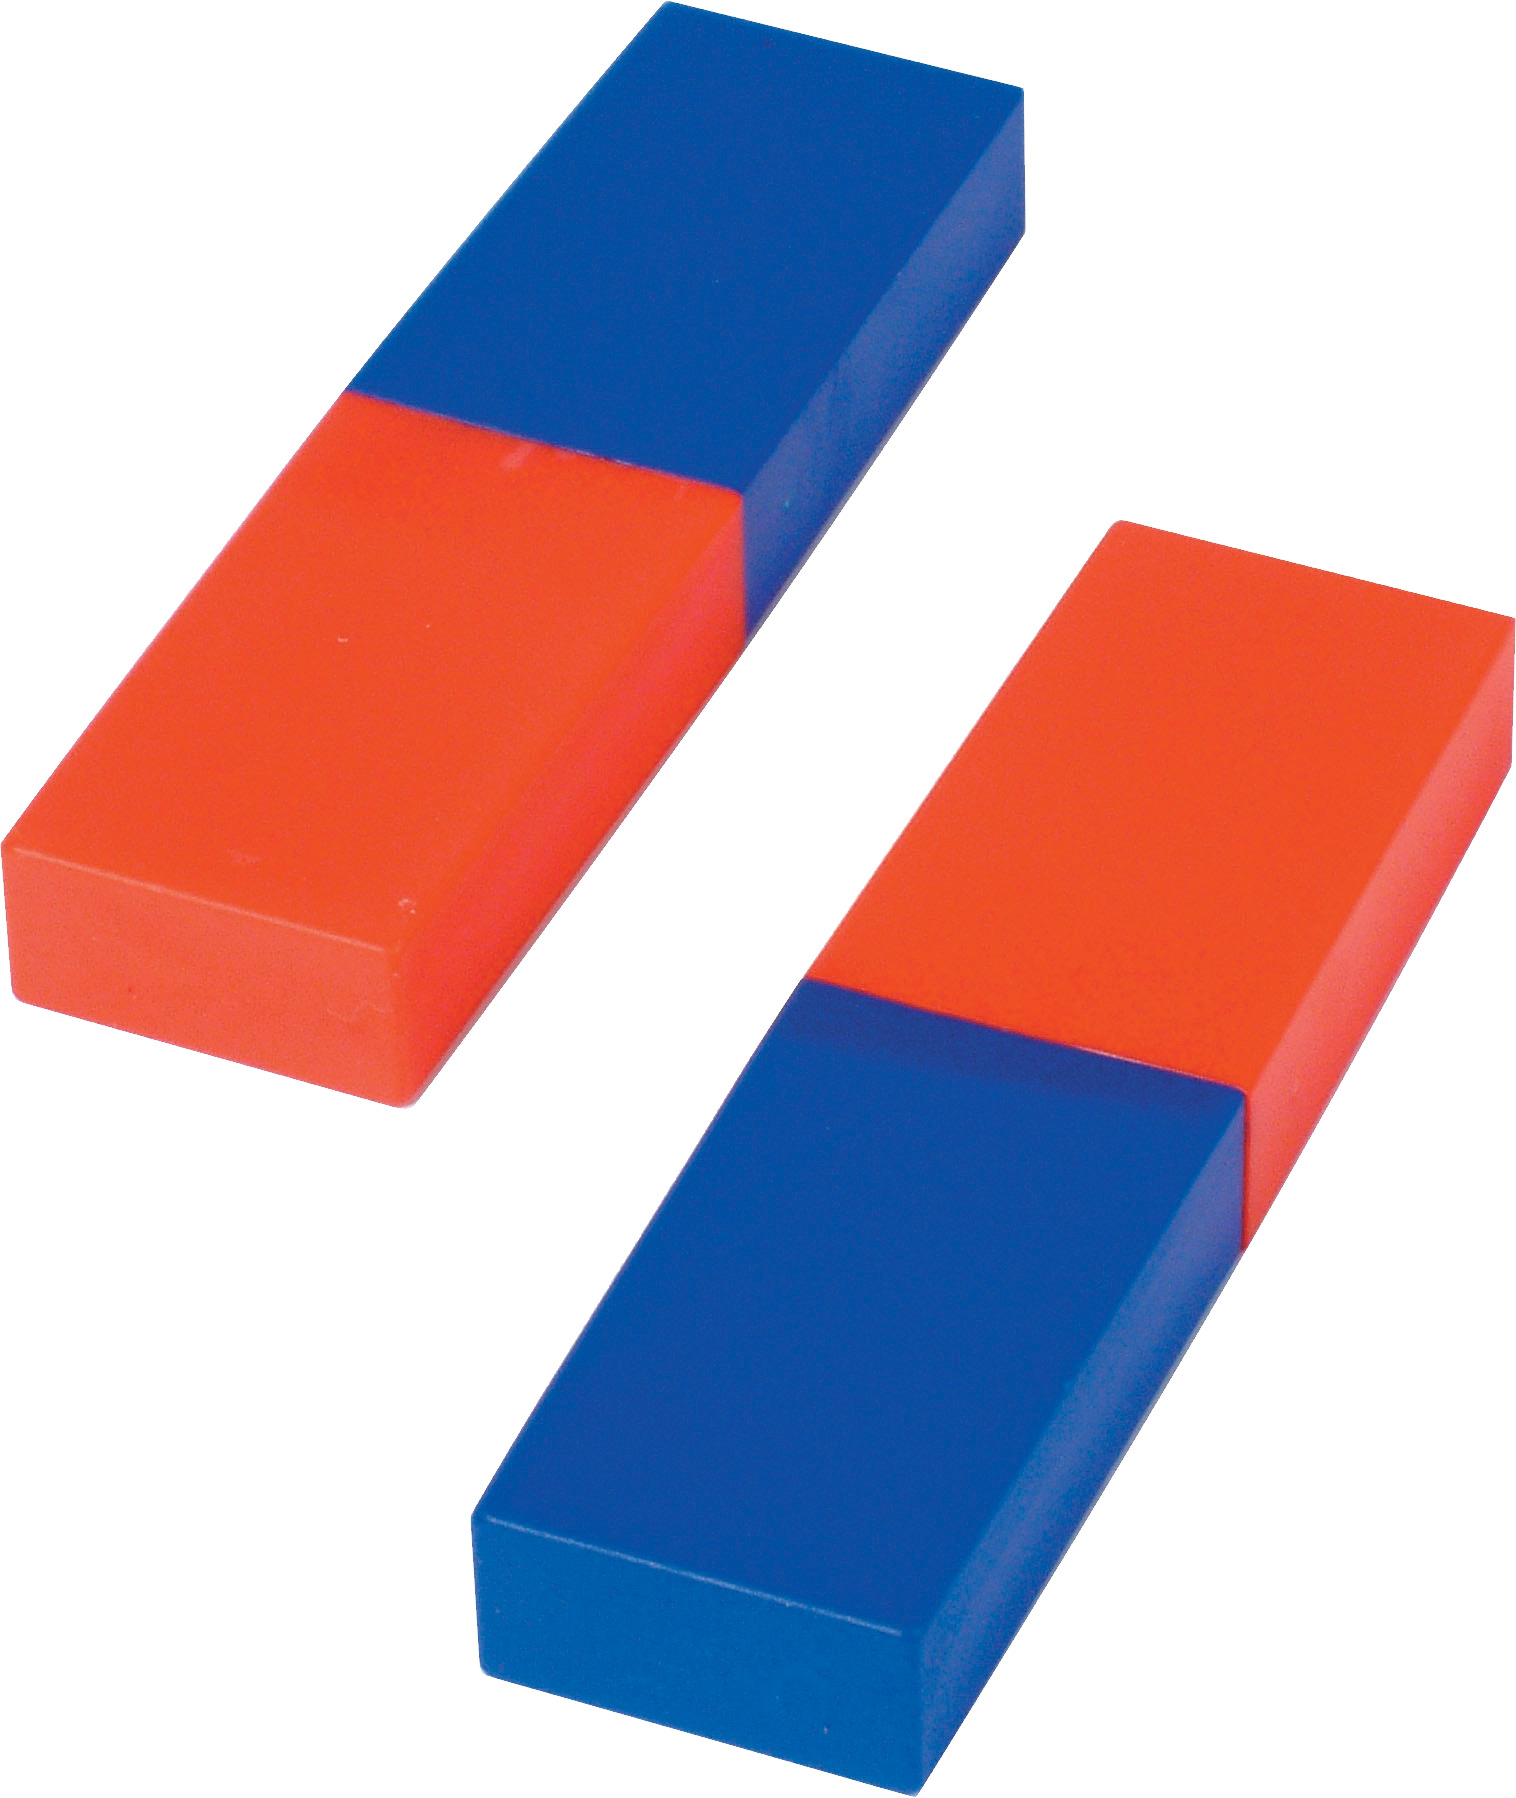 magnet clipart red blue